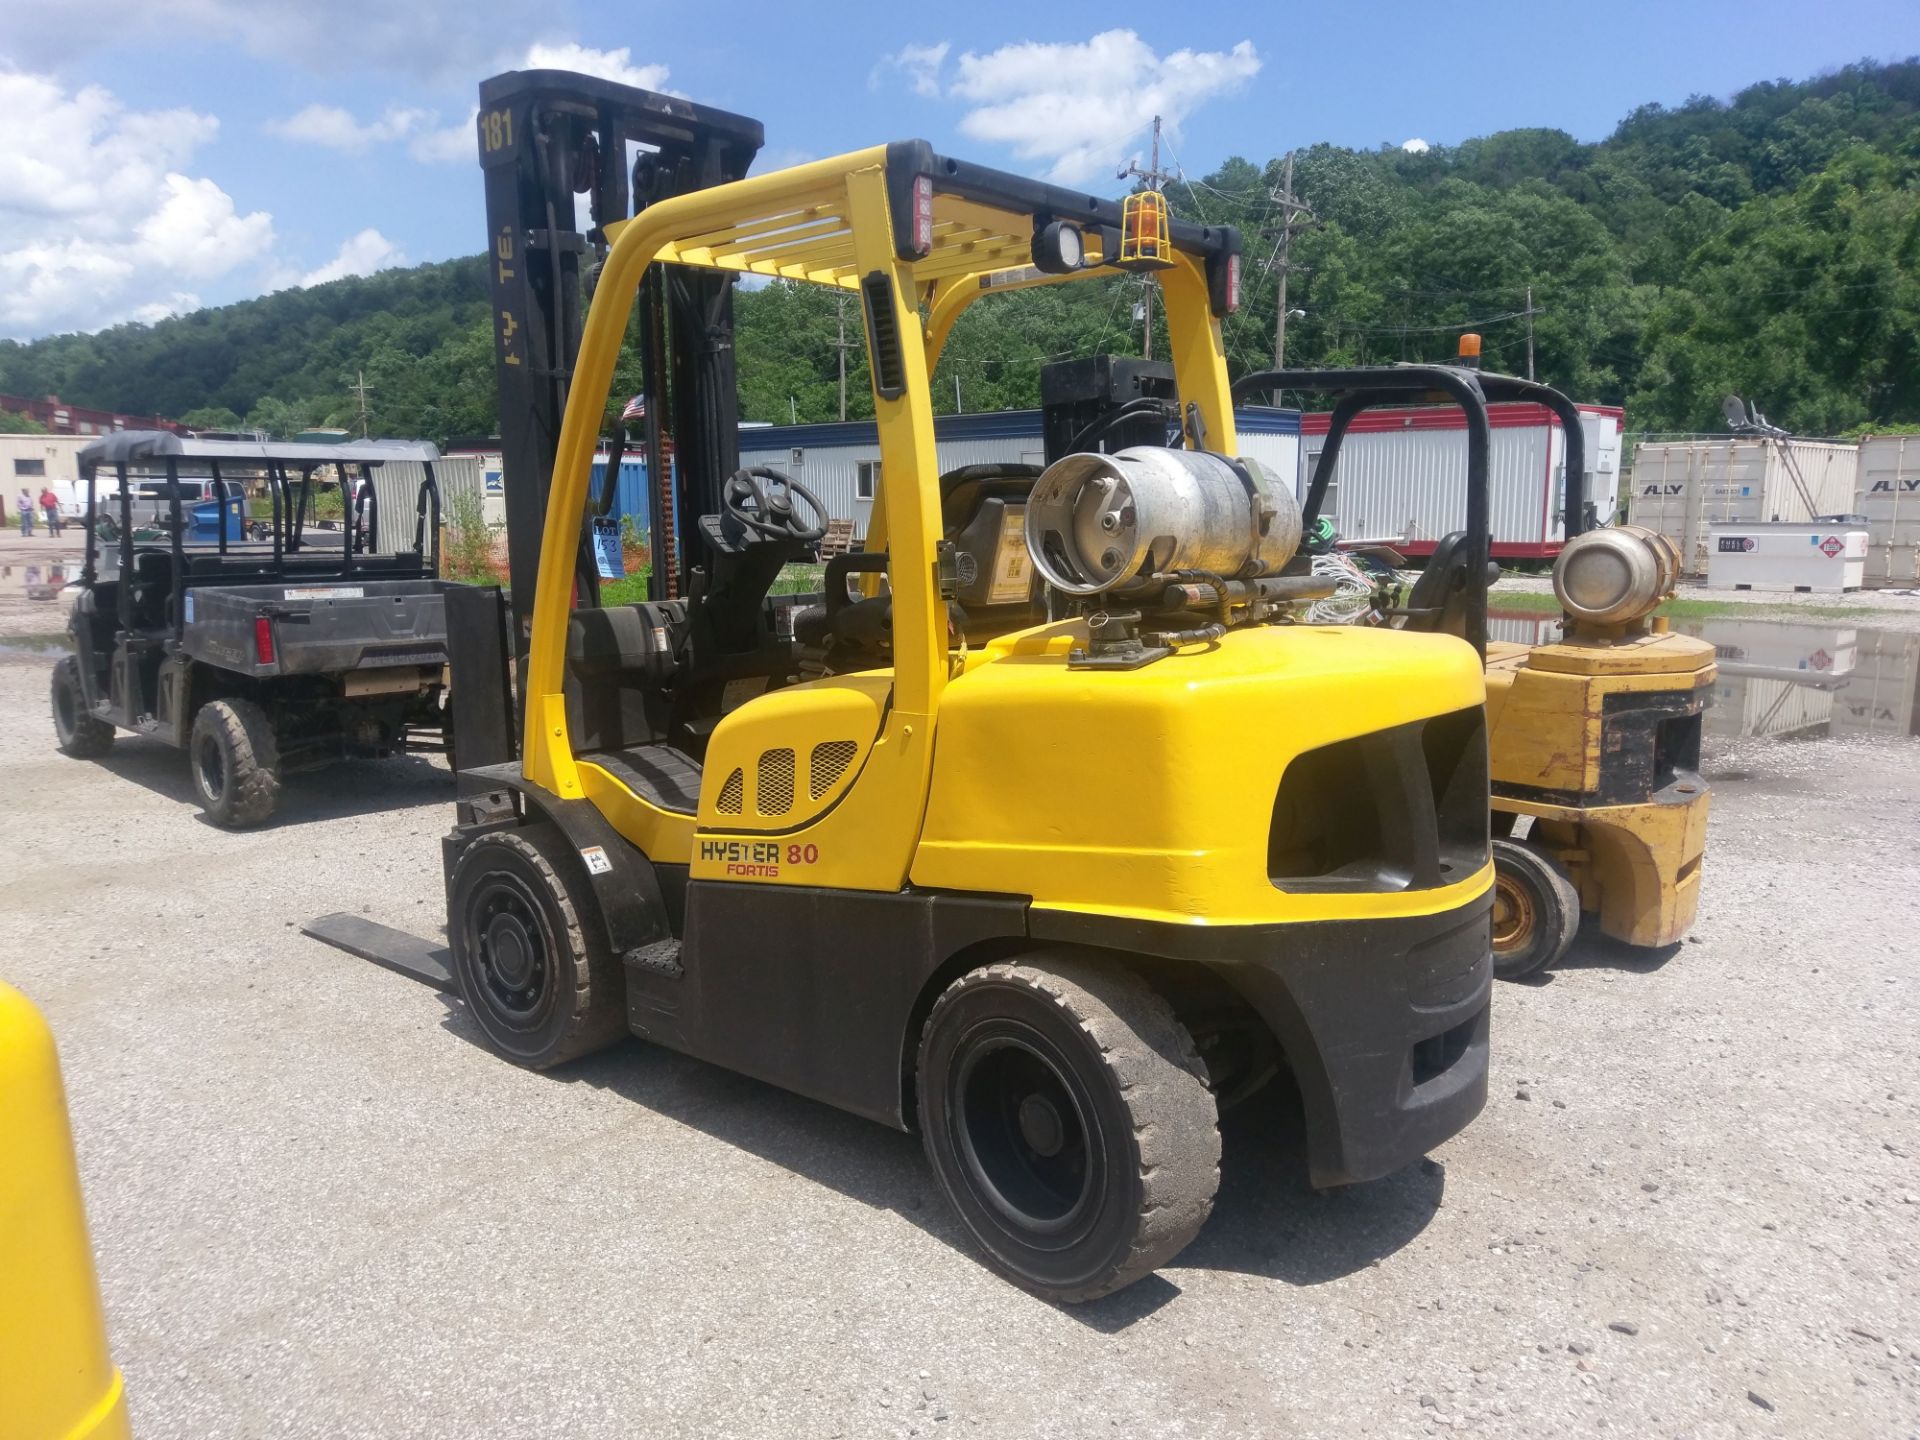 2013 - 8,000 LB. HYSTER MODEL H80FT LP GAS SOLID PNEUMATIC TIRE LIFT TRUCK; S/N R005V2492K - Image 4 of 7